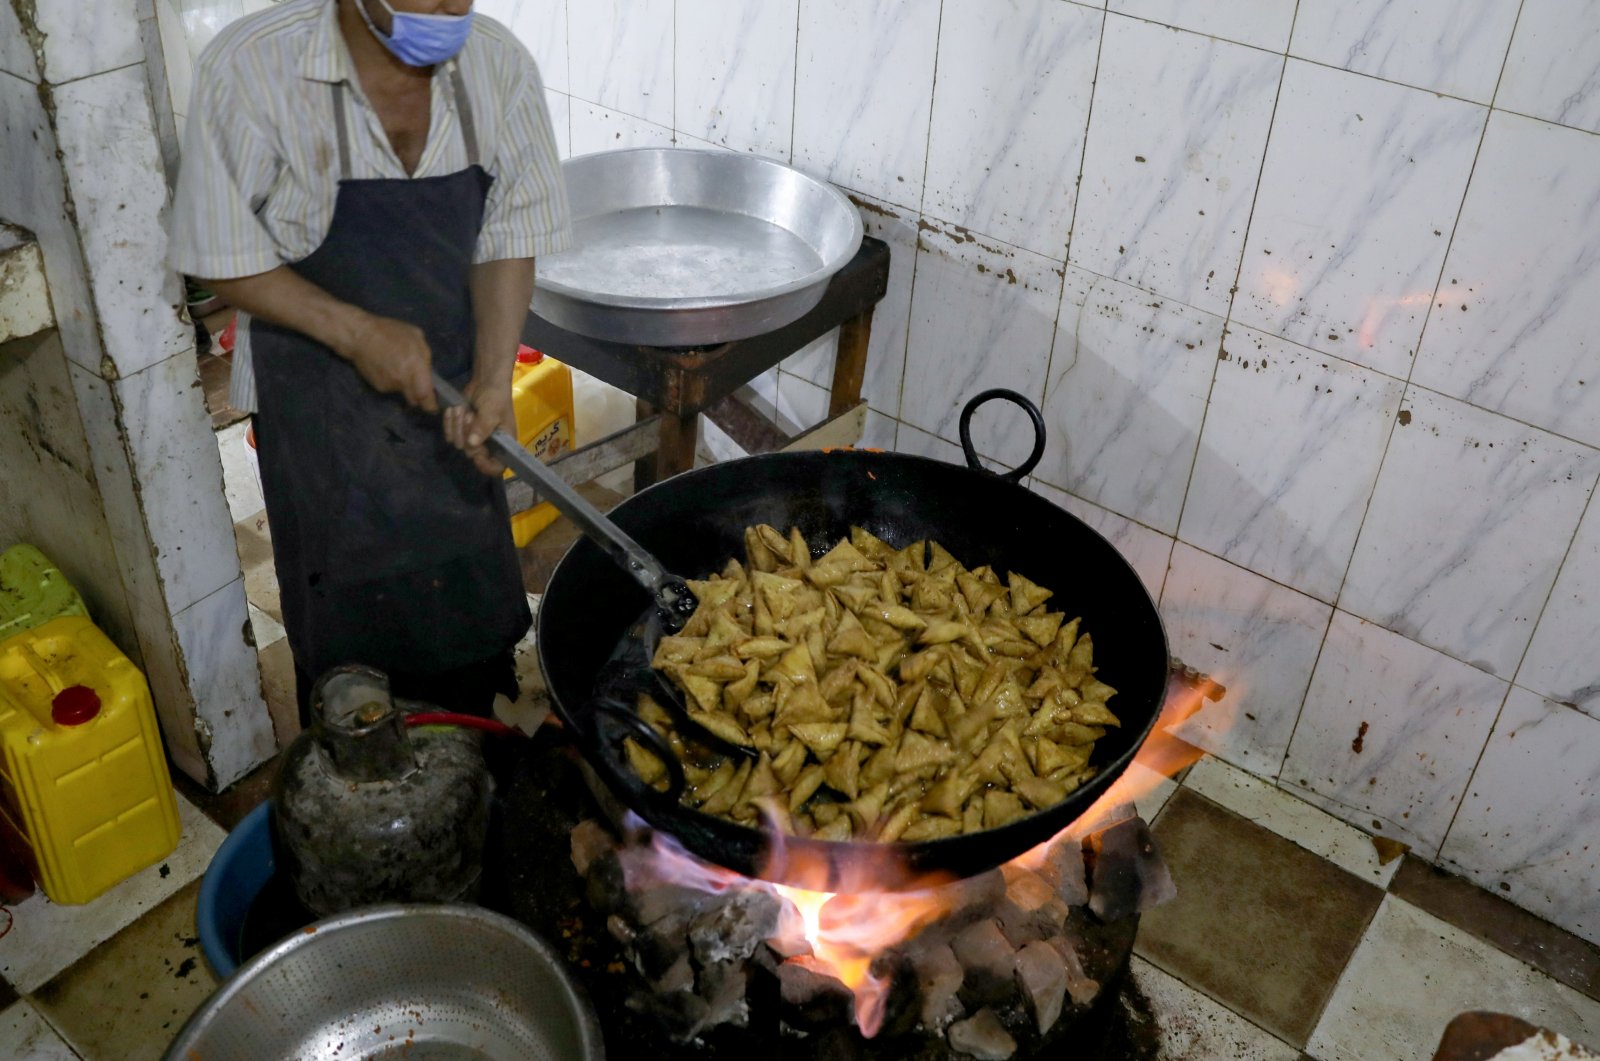 A cook fries sambusa snacks at a restaurant during the holy month of Ramadan in Sanaa, Yemen, April 15, 2021. (Reuters Photo)